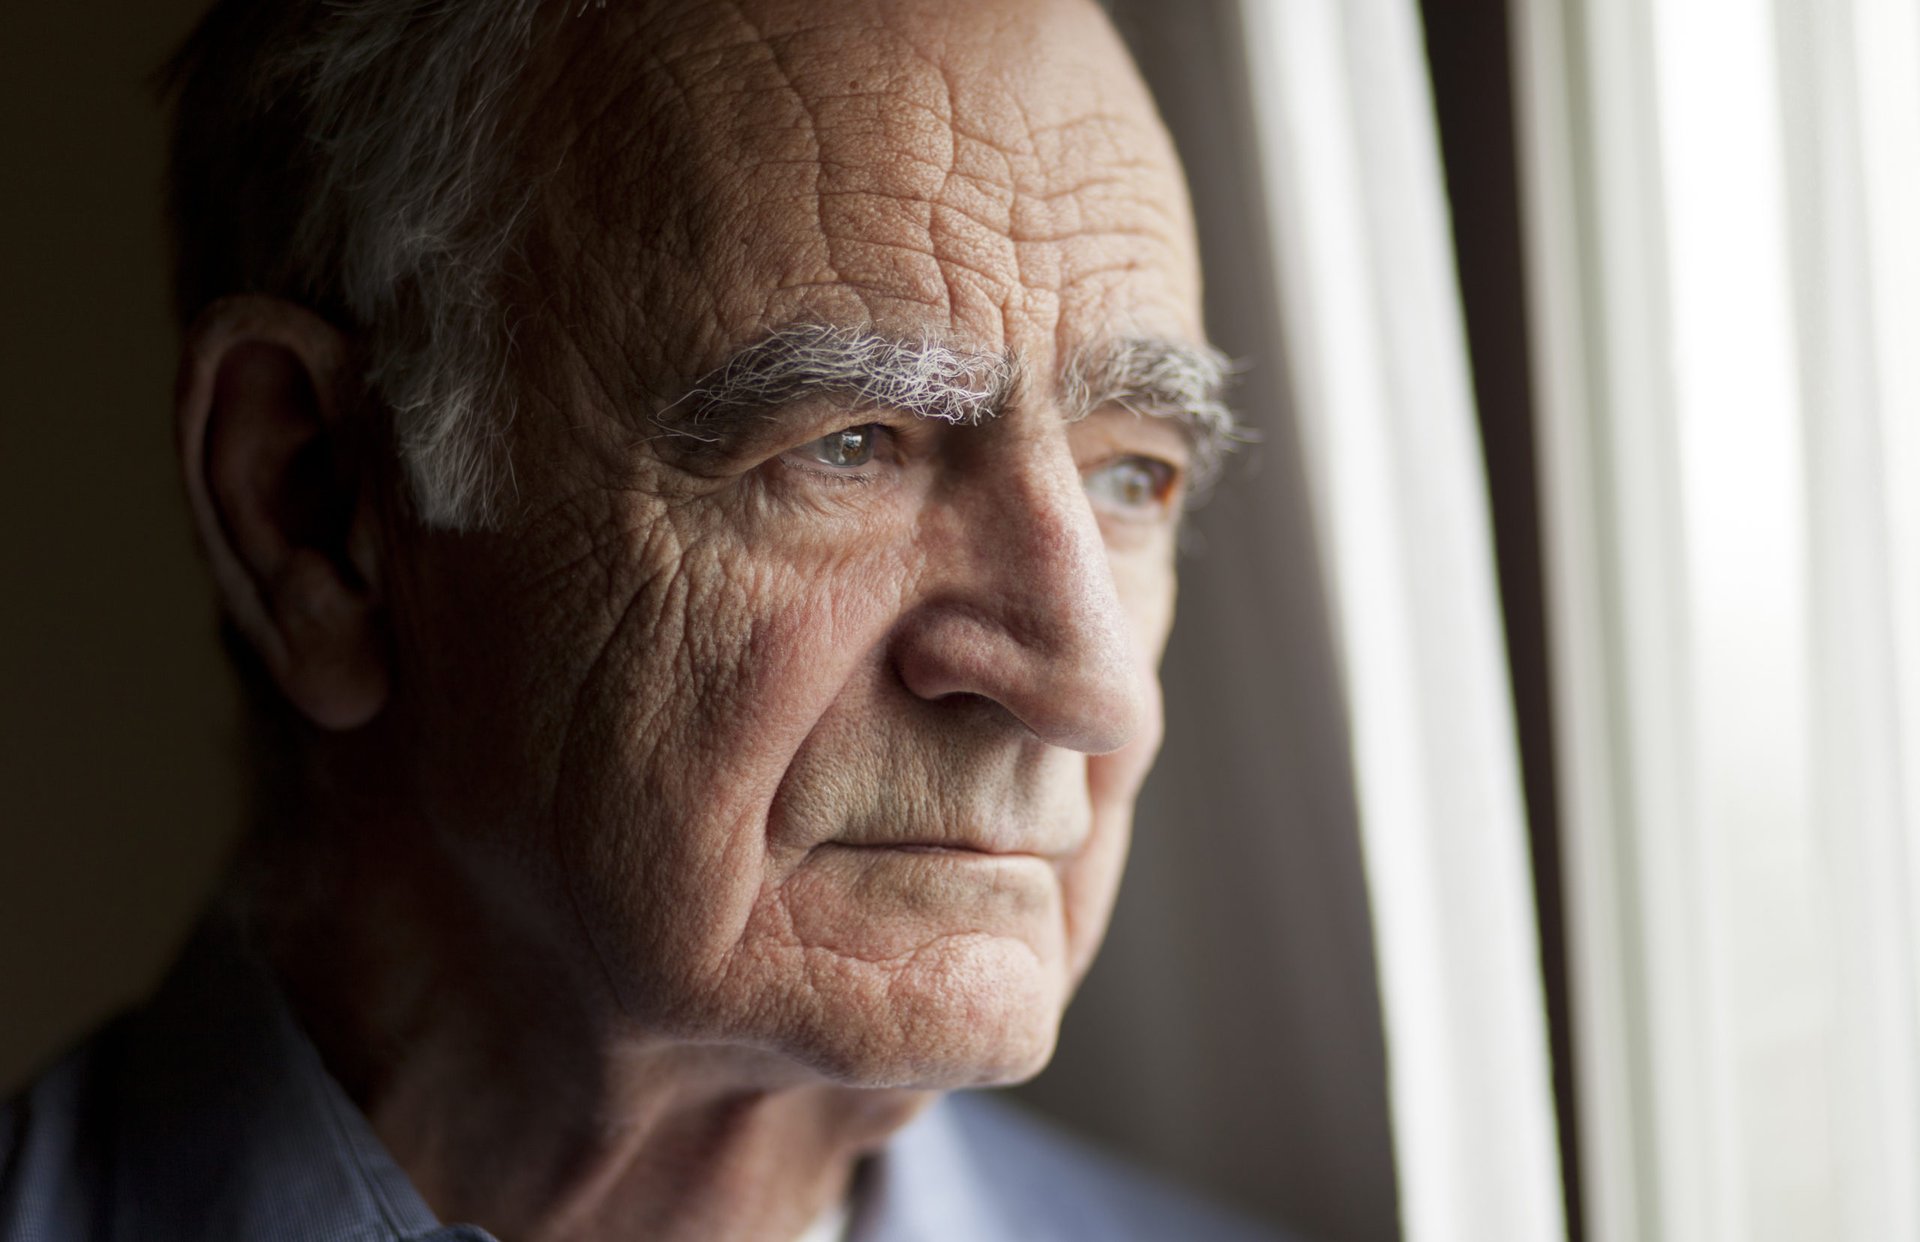 Elderly man lost in thought